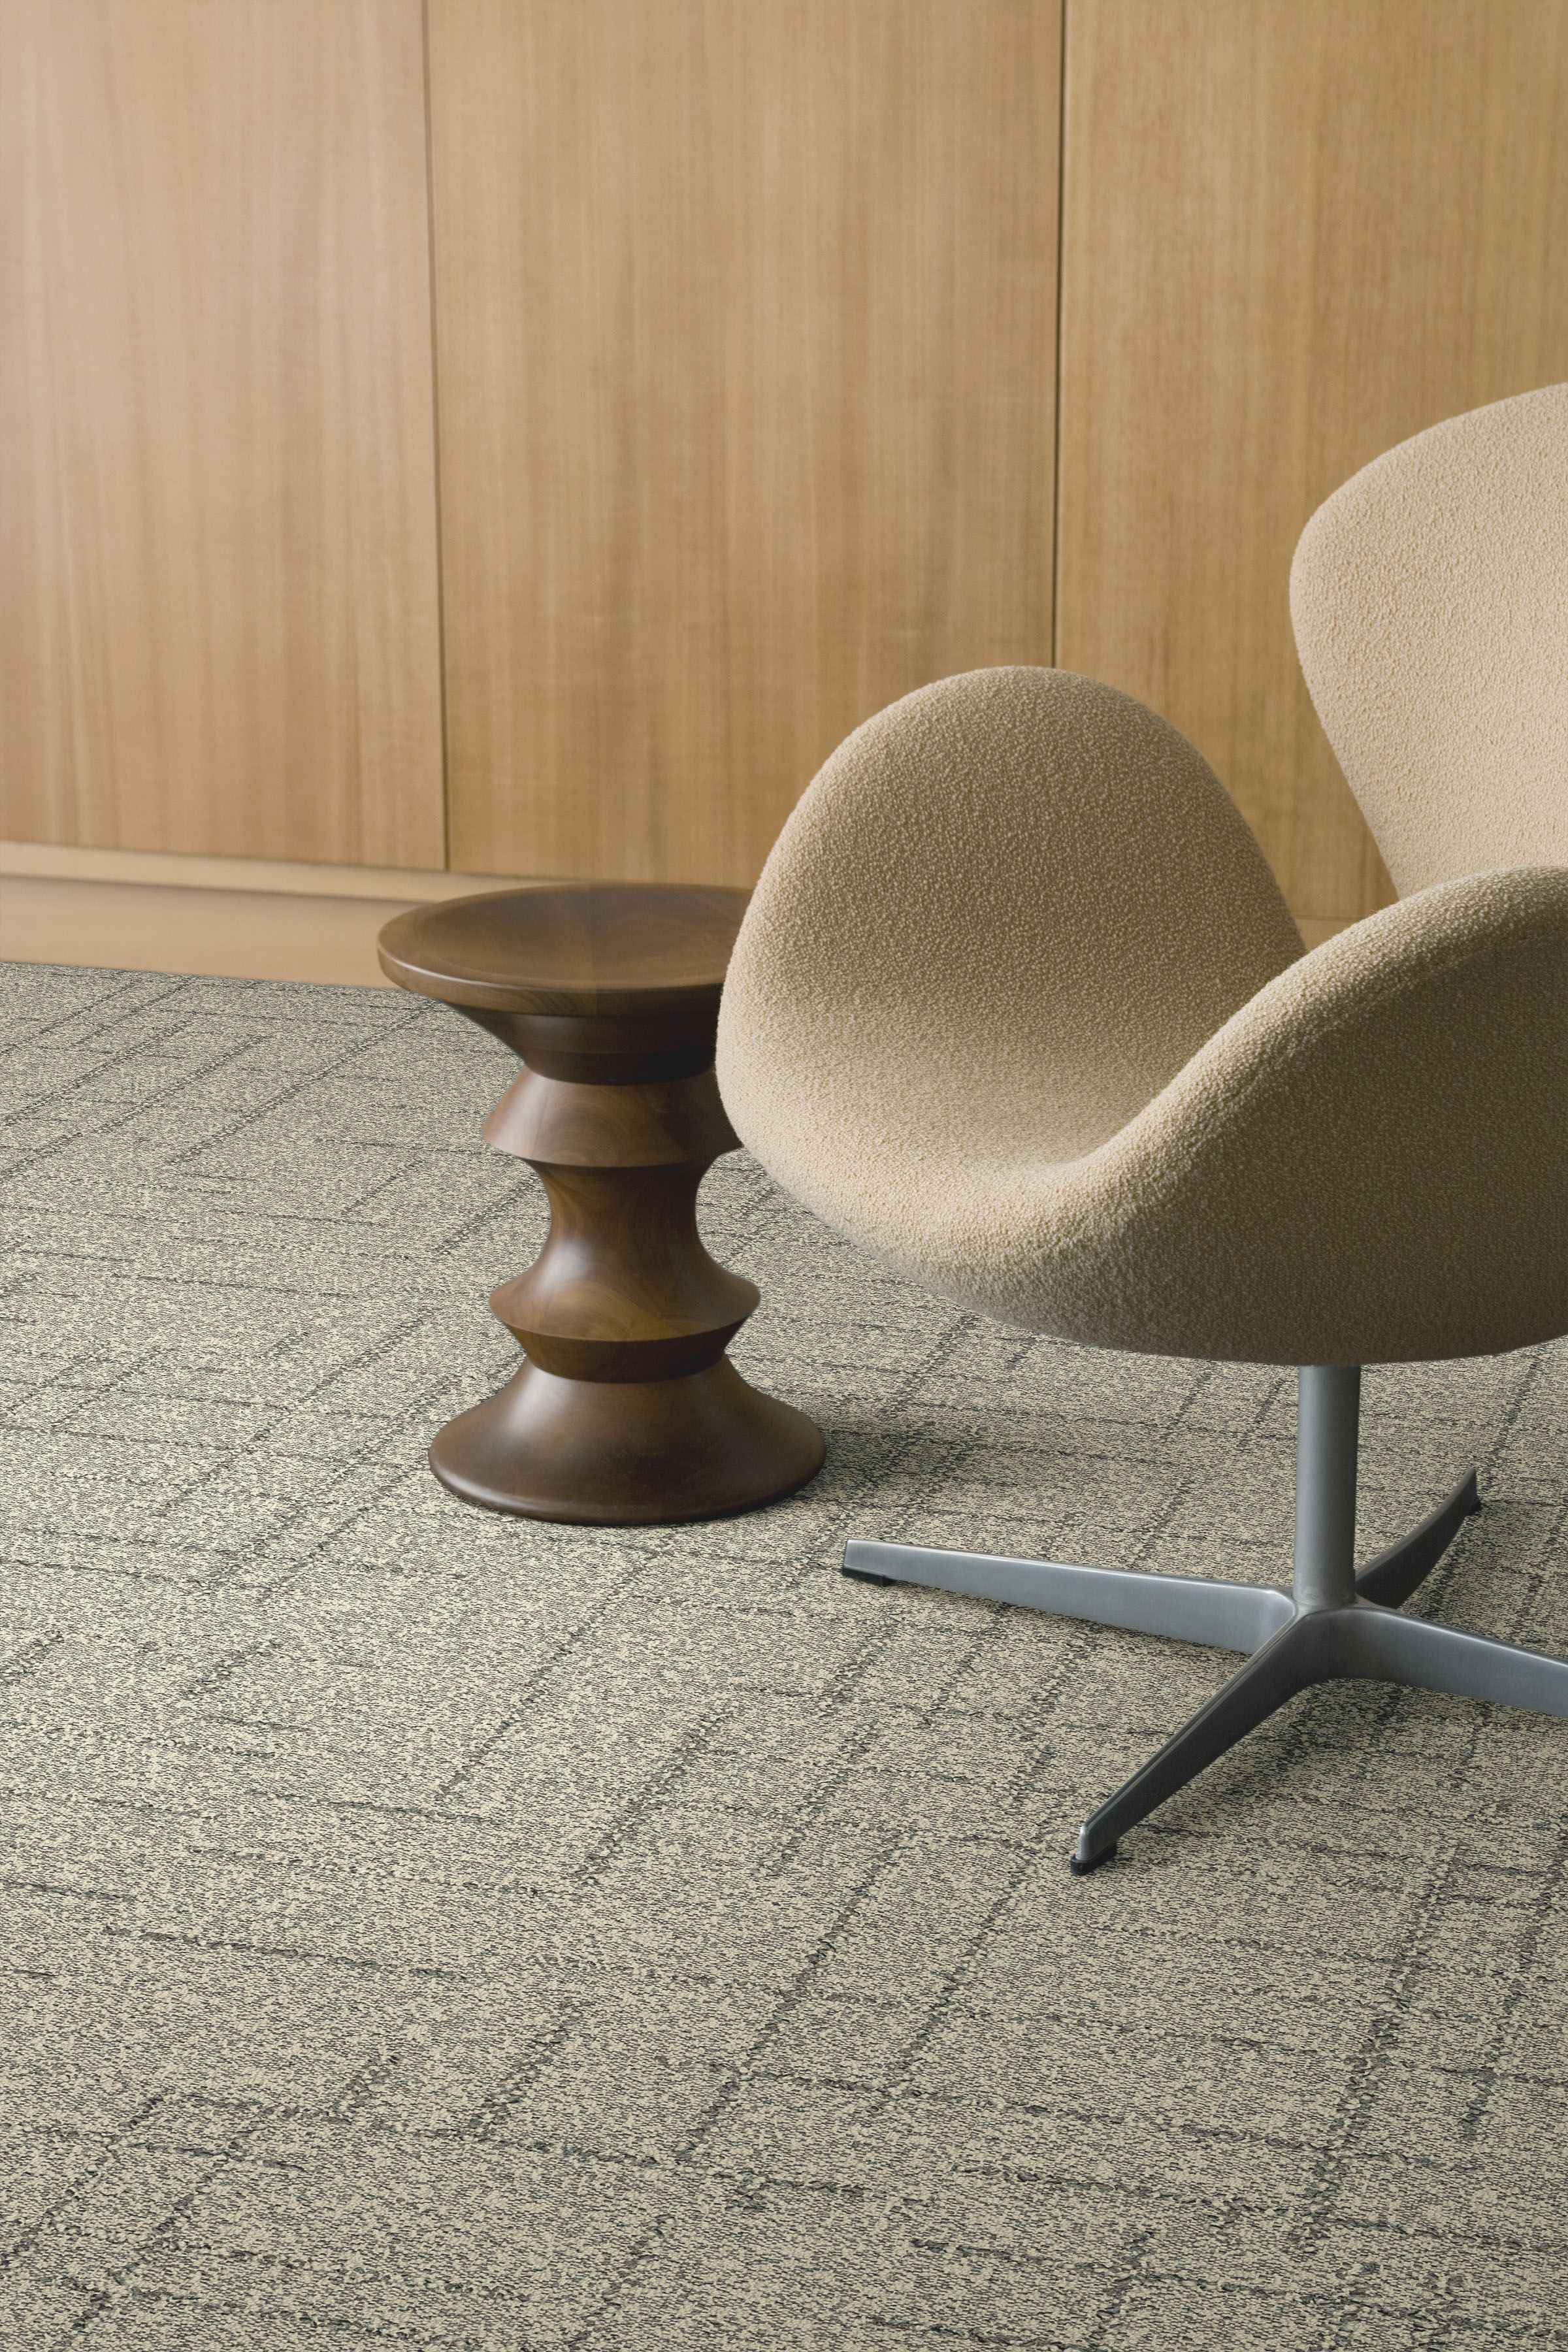 Interface DL925 carpet tile with chair and wood side table numéro d’image 1